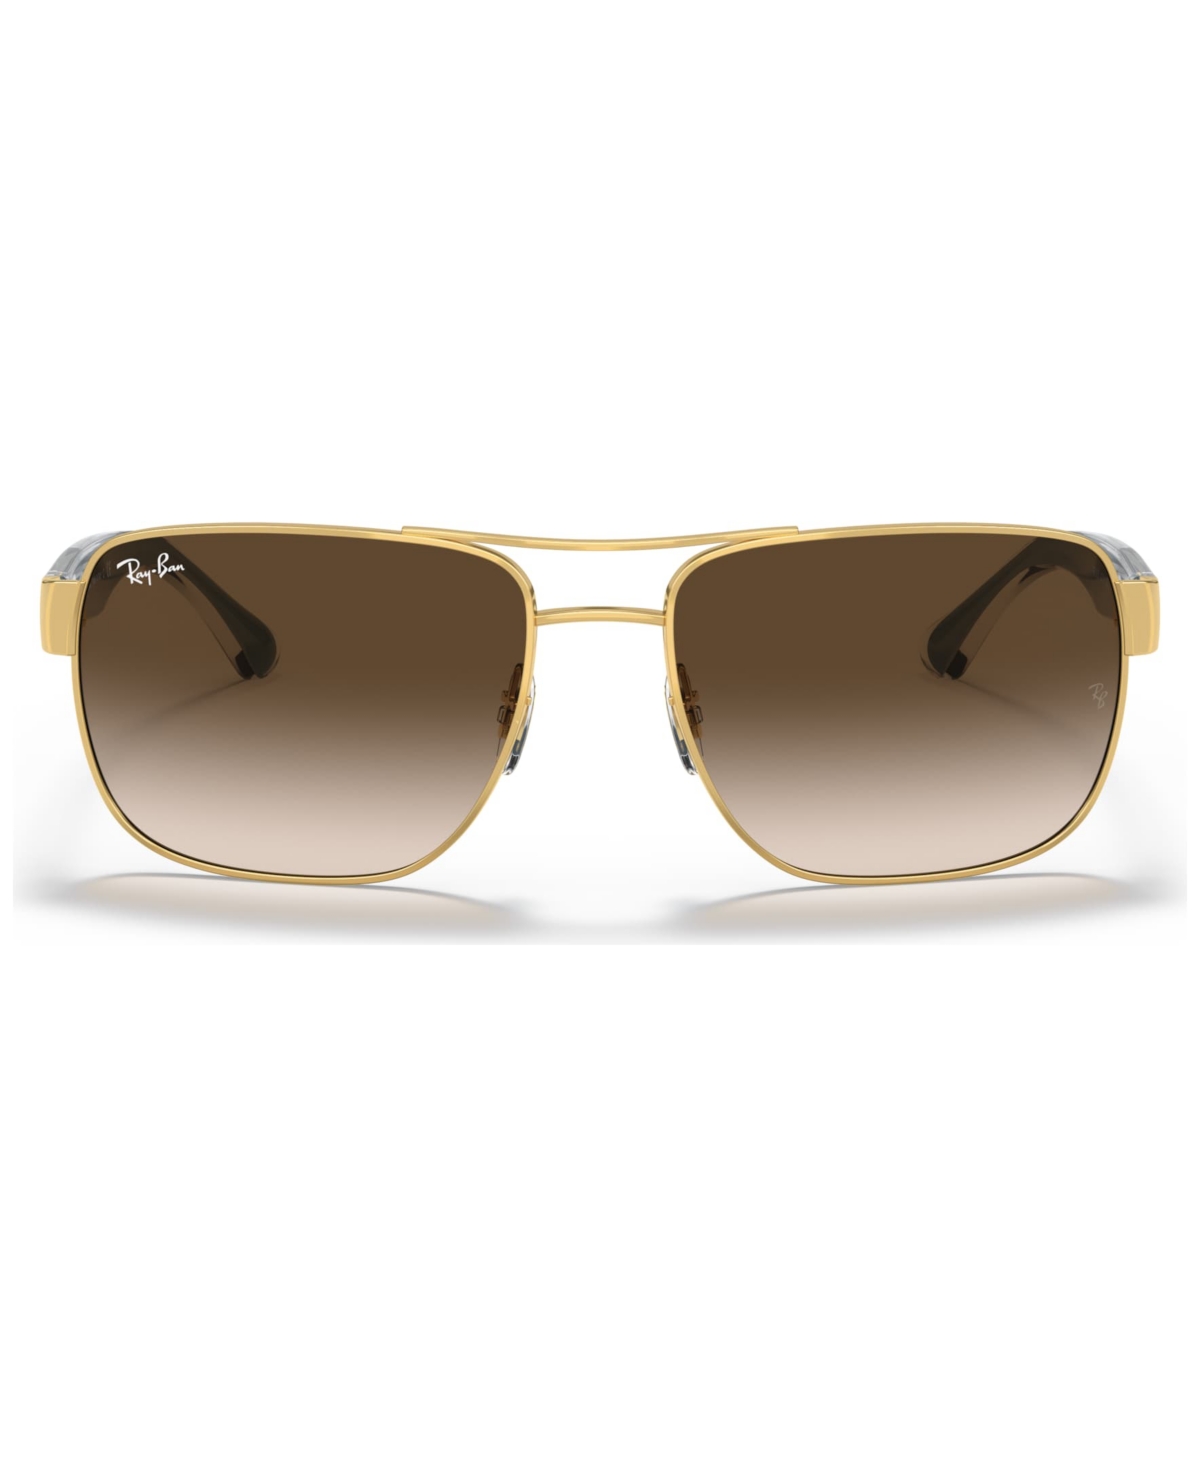 Ray Ban Sunglasses, Rb3530 In Brown / Gold